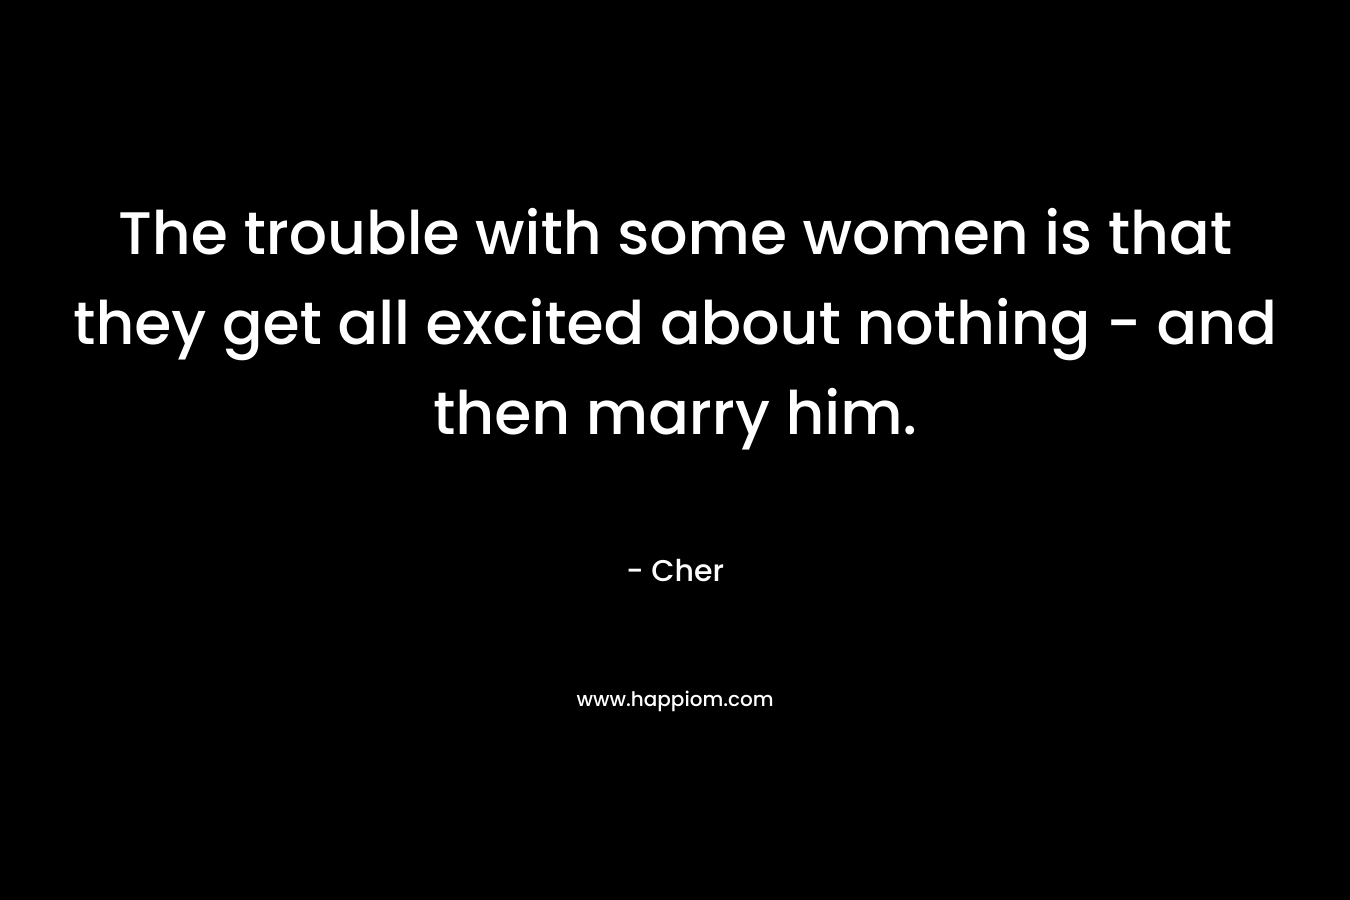 The trouble with some women is that they get all excited about nothing - and then marry him.